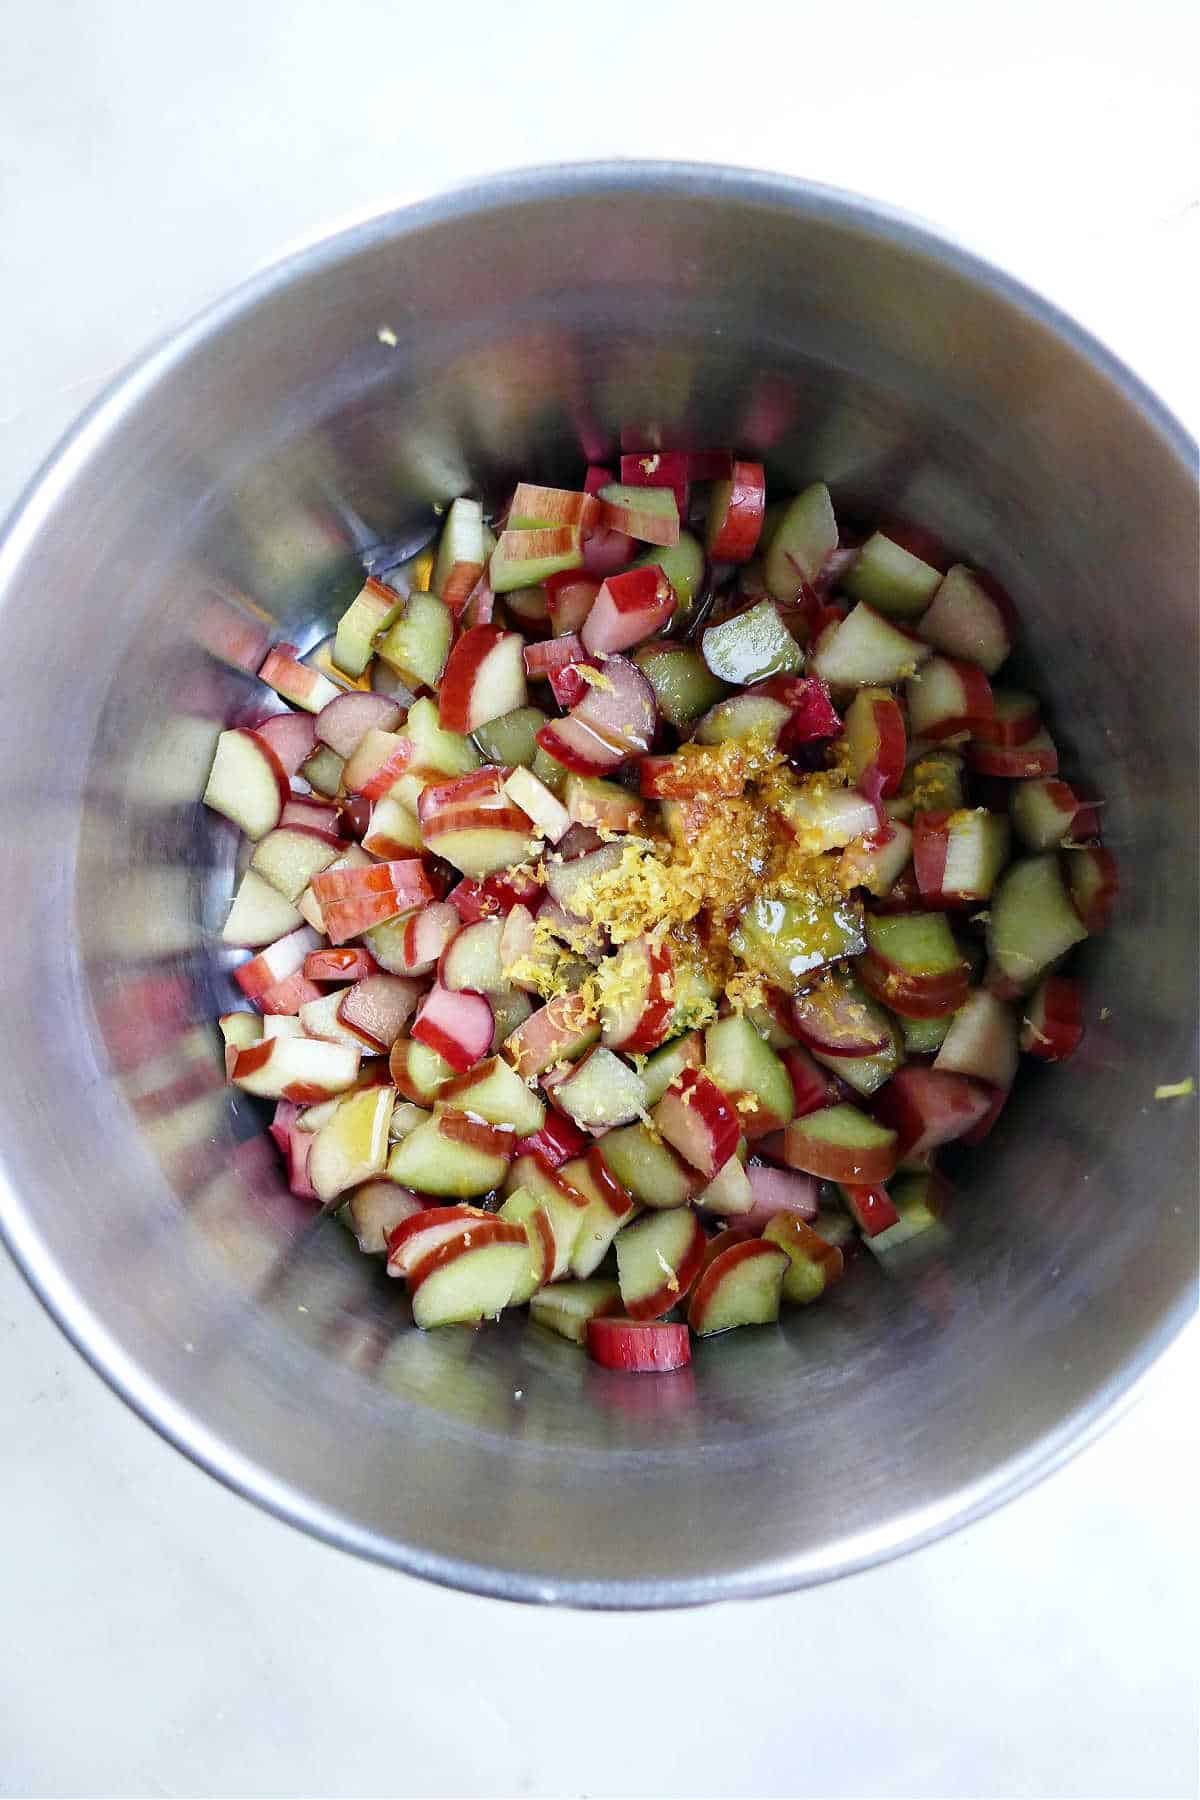 diced rhubarb, maple syrup, and lemon zest cooking in a saucepan